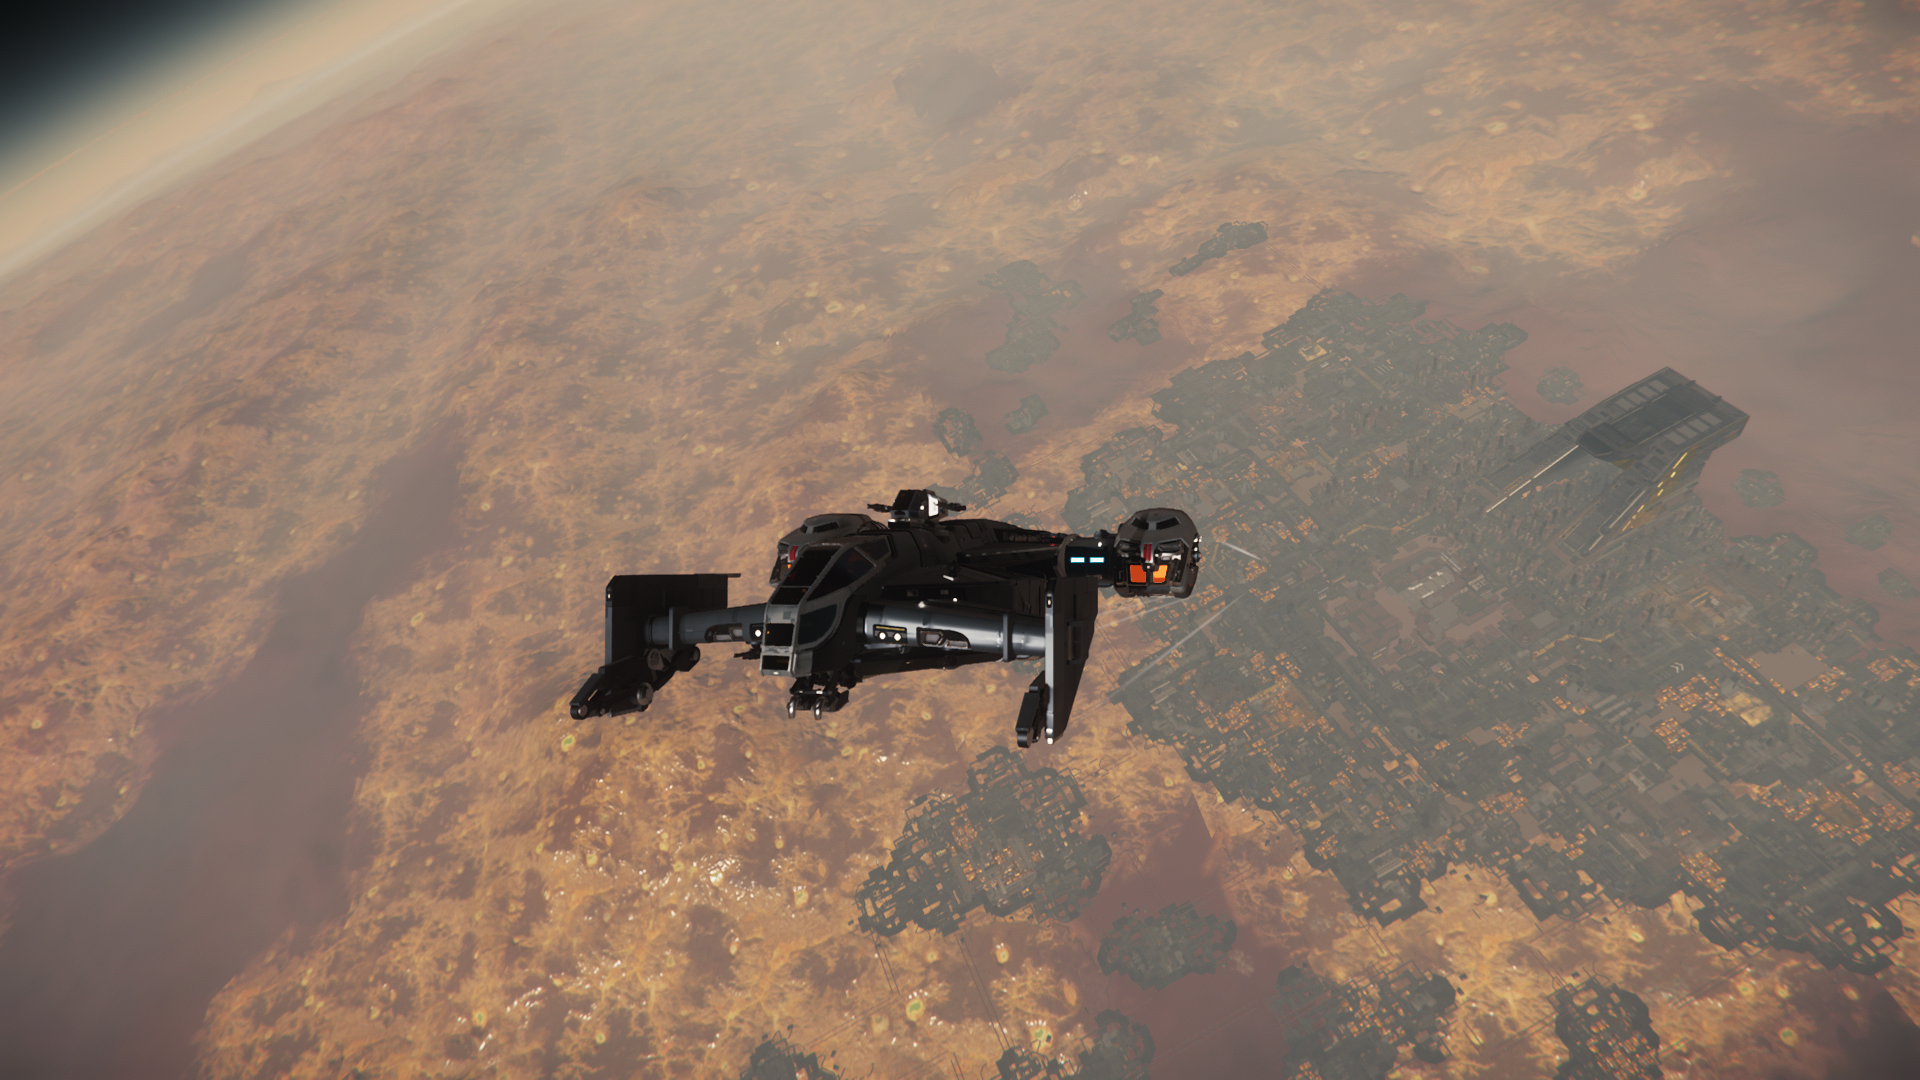 Star Citizen Alpha 3.18 Finally Released Including New Features, Tech, &  Content Aplenty